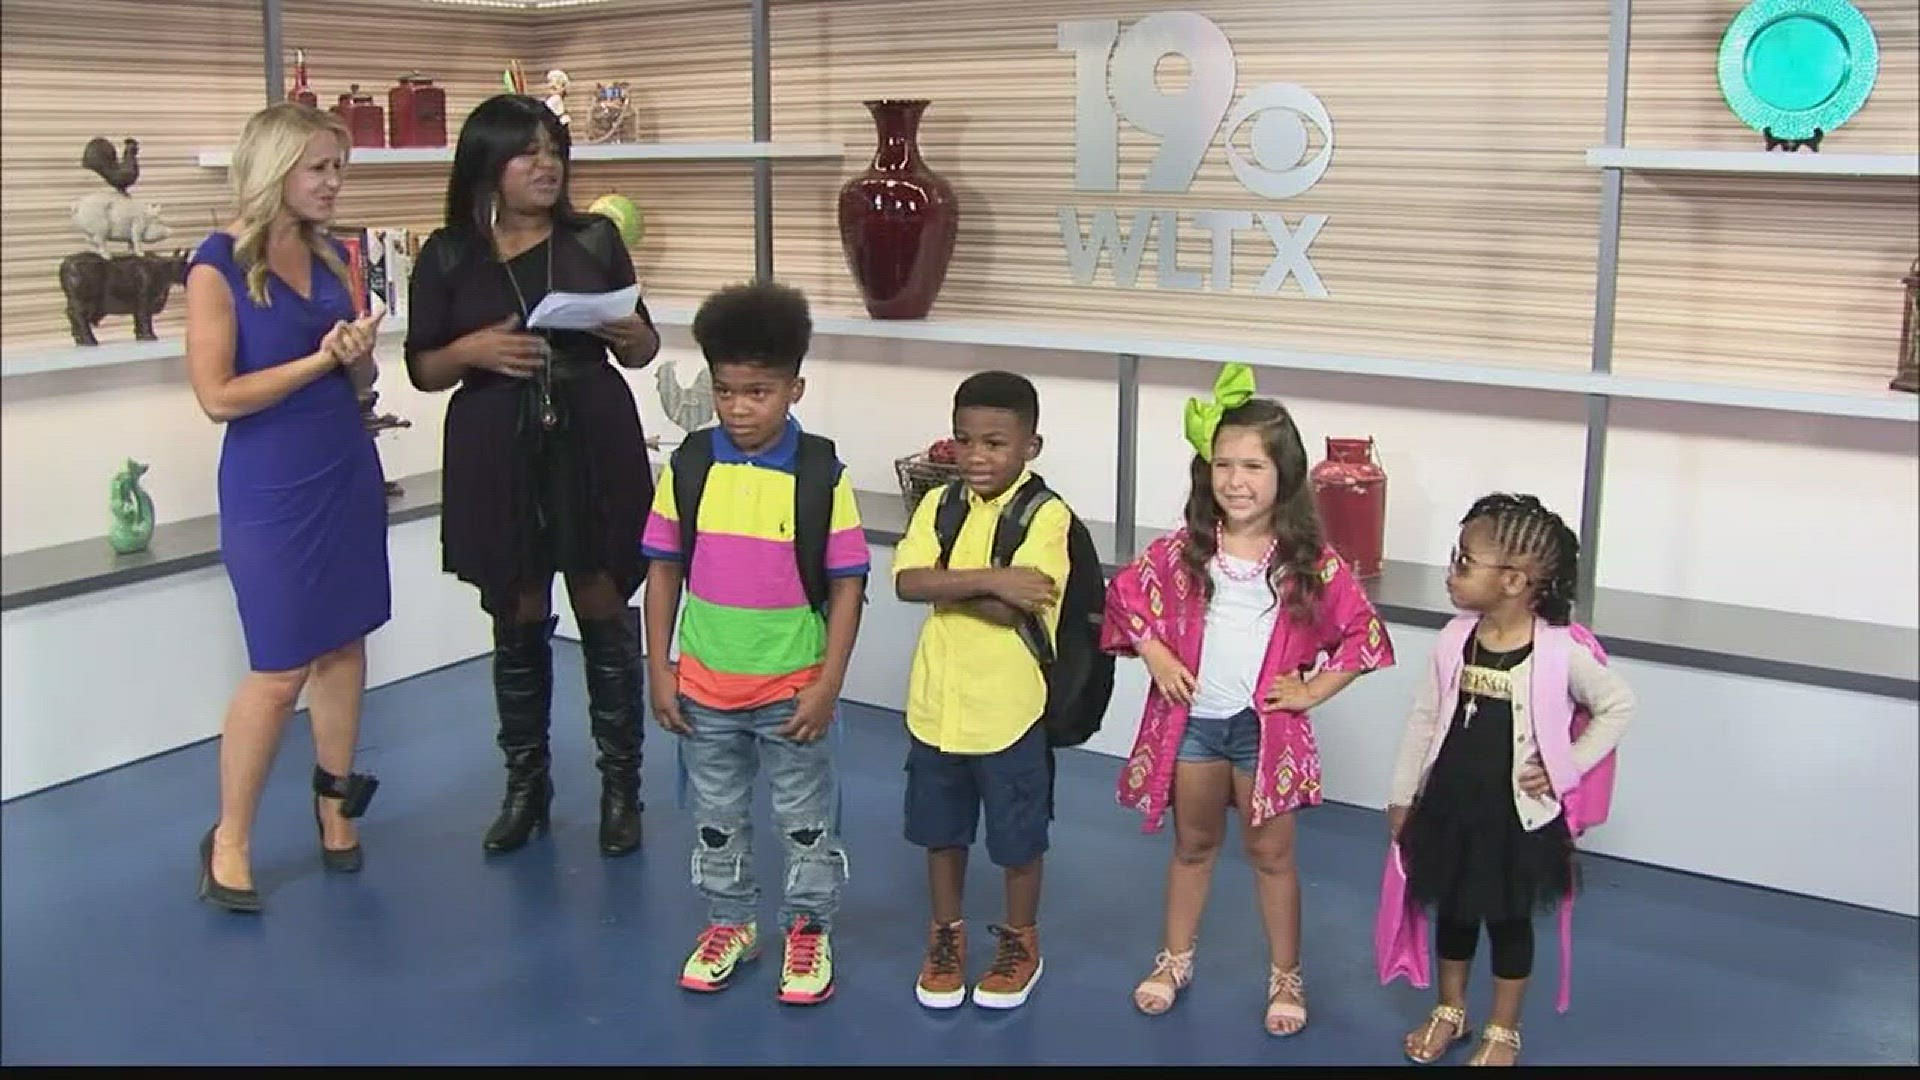 Stylist, Alicia Smith-Zeigler, brought in some very contemporary kids to show us exactly what's trending in fashion as they get ready to head back to school.